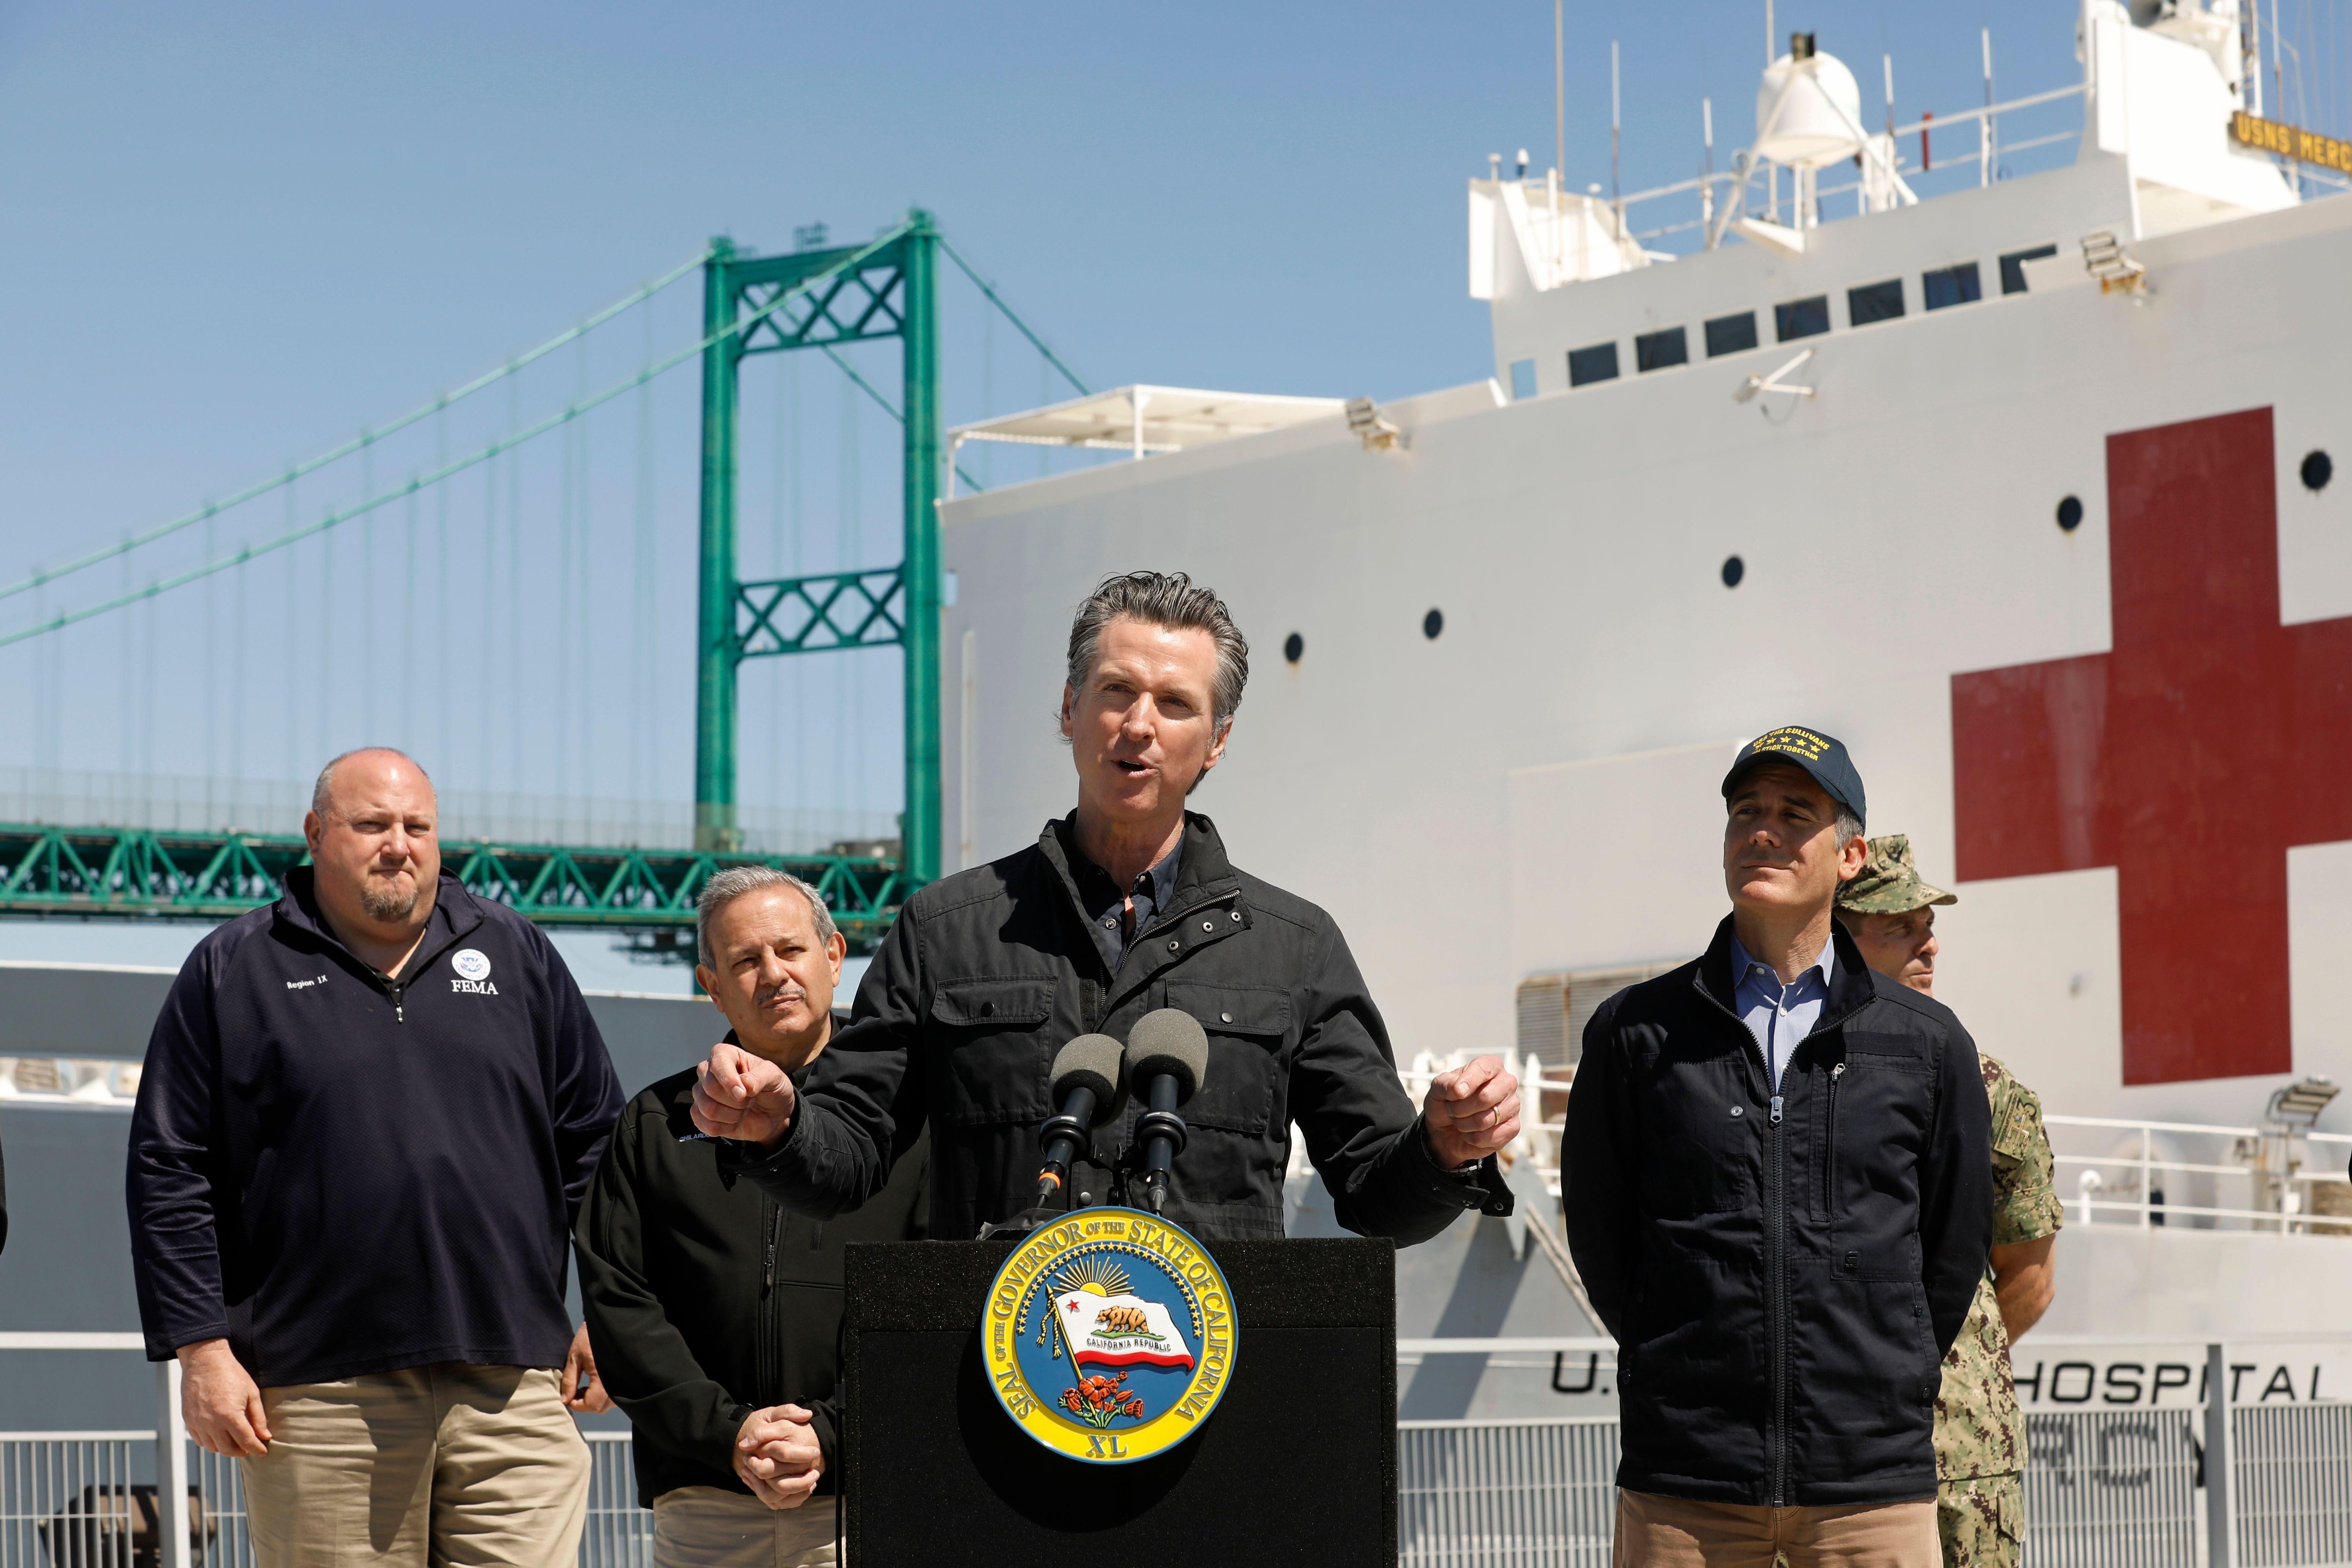 Newsom speaks at a podium with federal and local officials standing near him and a big military ship with a red cross on it behind him